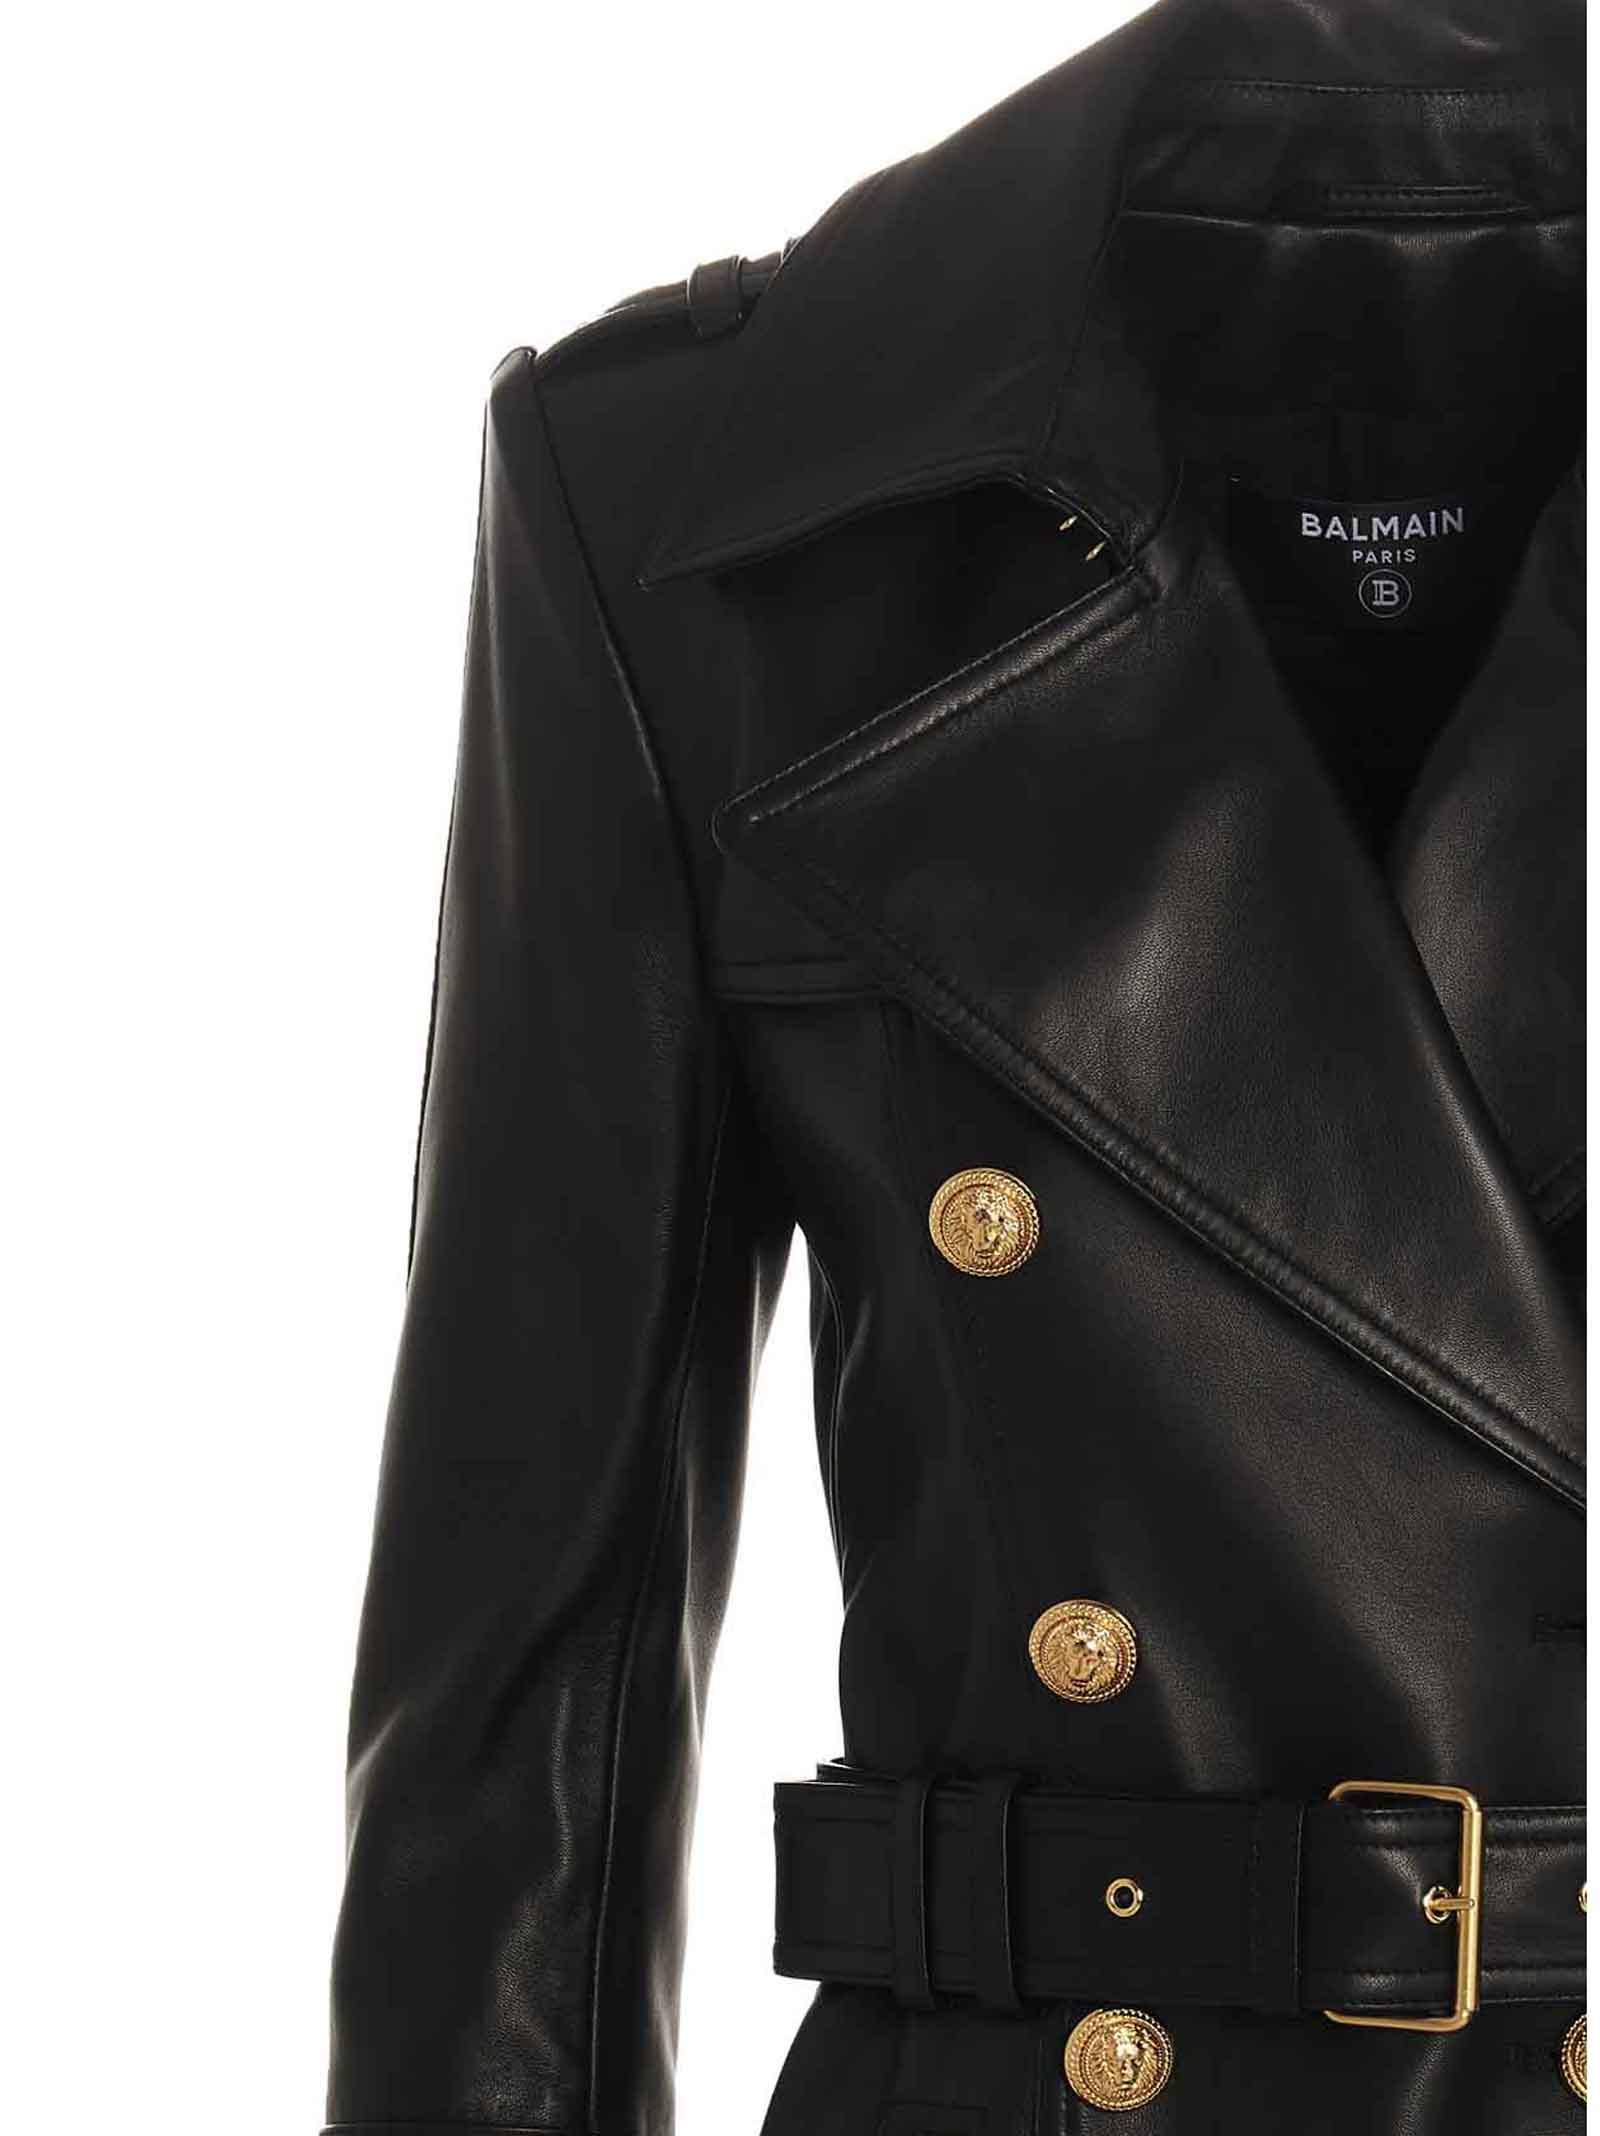 Balmain Belted Double-breasted Leather Trench Coat in Black | Lyst